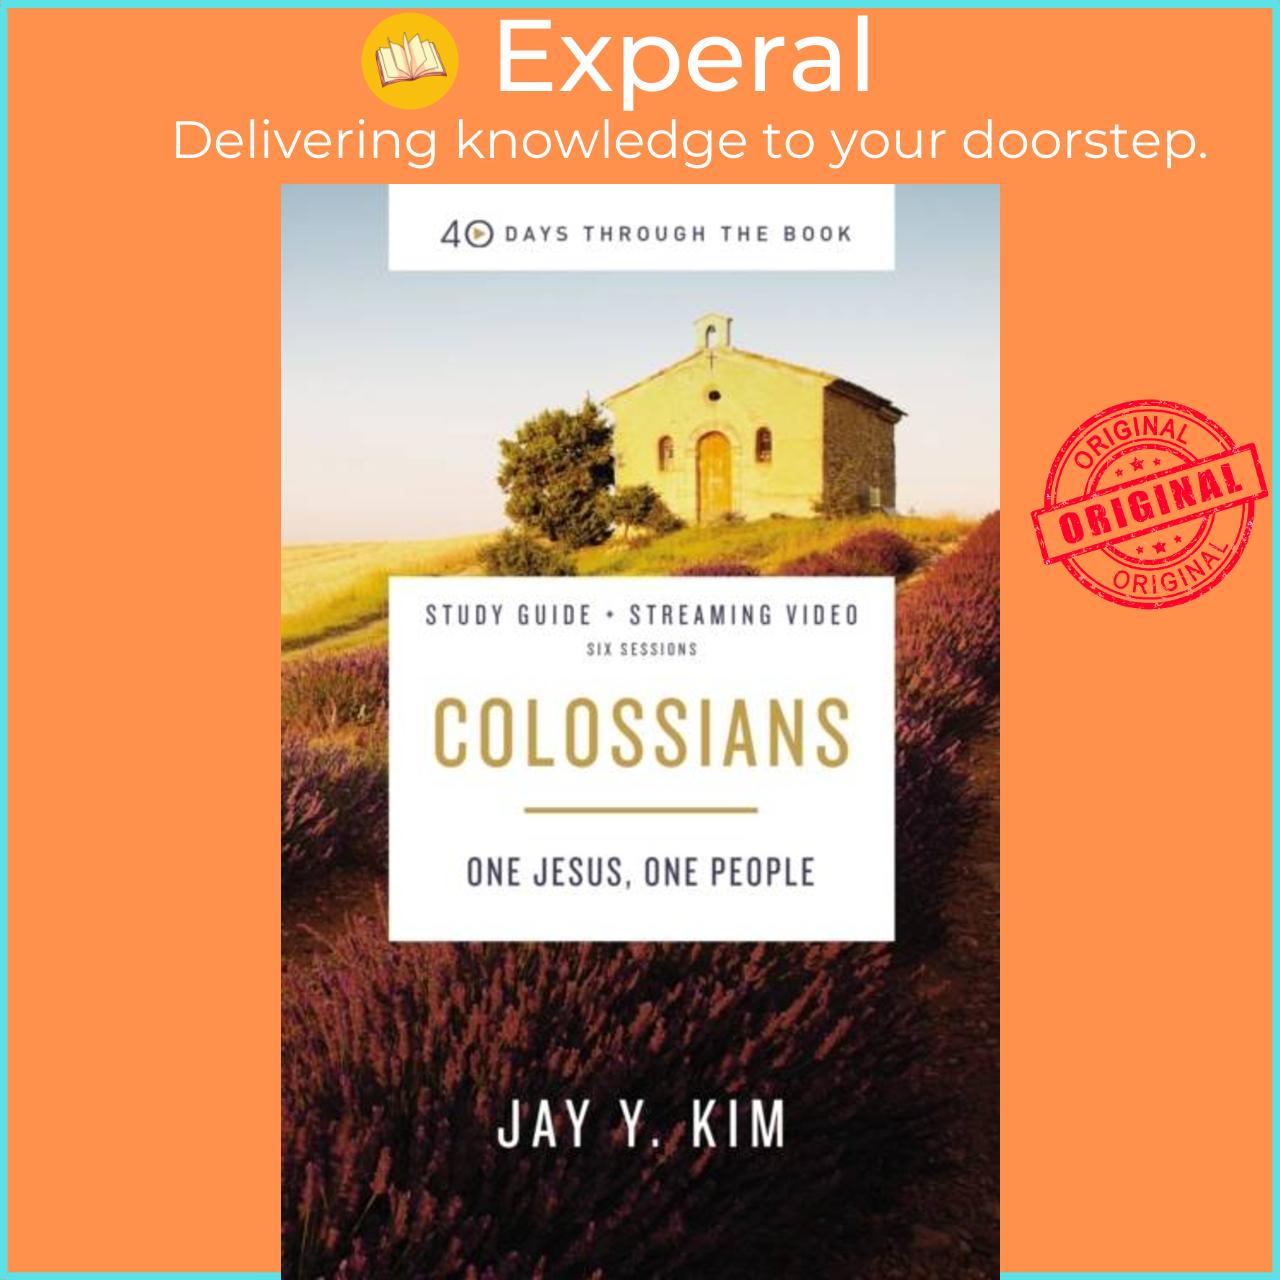 Sách - Colossians Bible Study Guide plus Streaming Video - One Jesus, One People by Jay Y. Kim (UK edition, paperback)